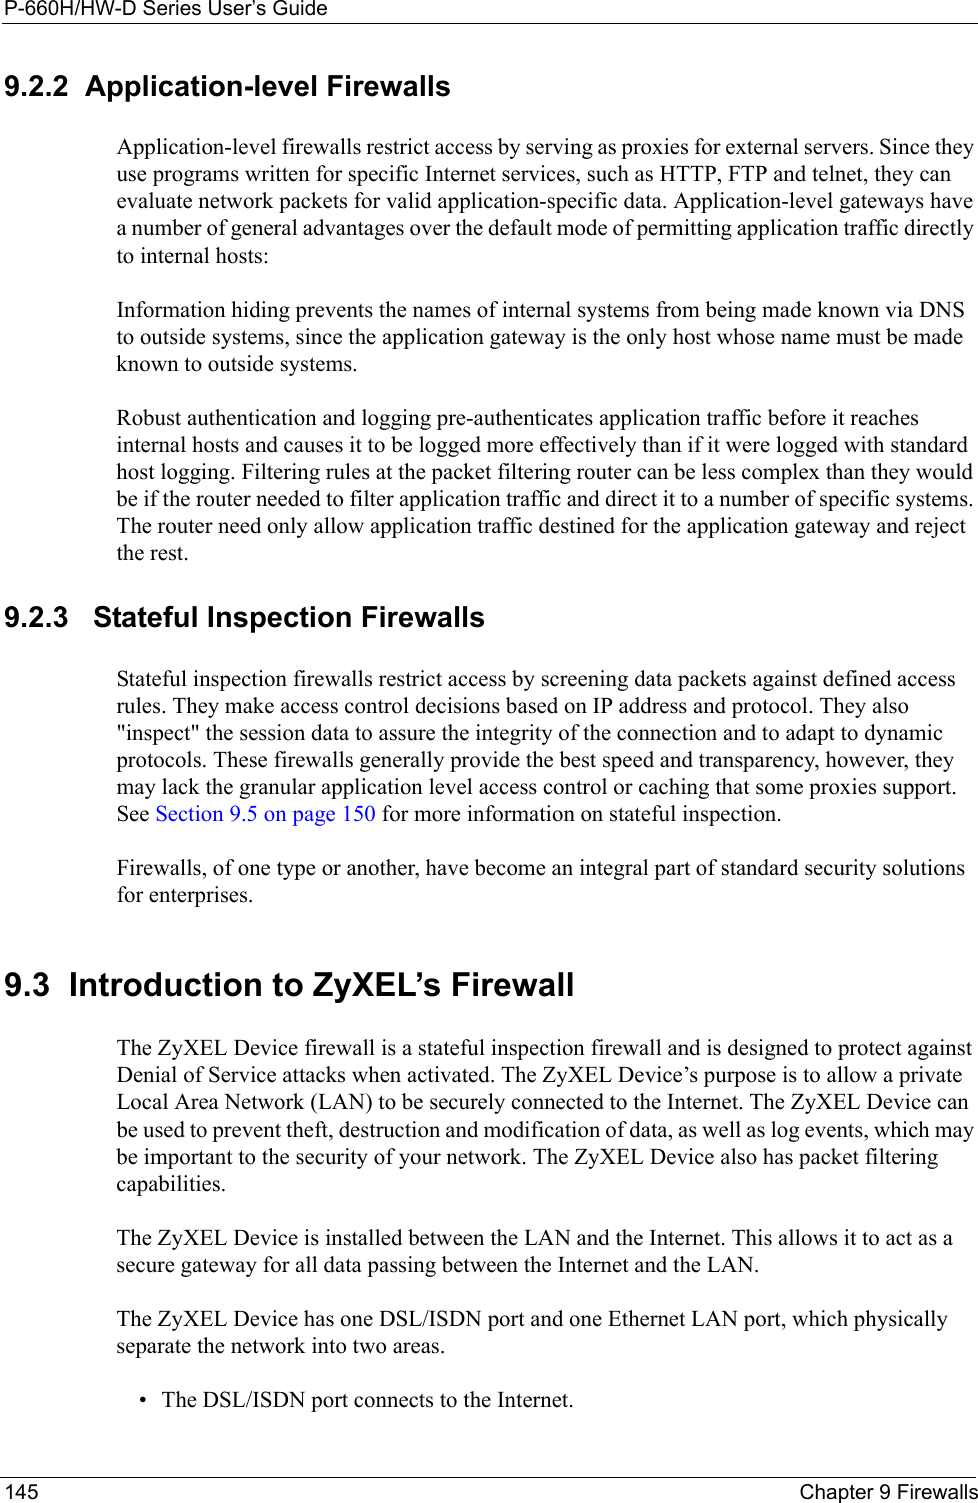 P-660H/HW-D Series User’s Guide145 Chapter 9 Firewalls9.2.2  Application-level FirewallsApplication-level firewalls restrict access by serving as proxies for external servers. Since they use programs written for specific Internet services, such as HTTP, FTP and telnet, they can evaluate network packets for valid application-specific data. Application-level gateways have a number of general advantages over the default mode of permitting application traffic directly to internal hosts:Information hiding prevents the names of internal systems from being made known via DNS to outside systems, since the application gateway is the only host whose name must be made known to outside systems.Robust authentication and logging pre-authenticates application traffic before it reaches internal hosts and causes it to be logged more effectively than if it were logged with standard host logging. Filtering rules at the packet filtering router can be less complex than they would be if the router needed to filter application traffic and direct it to a number of specific systems. The router need only allow application traffic destined for the application gateway and reject the rest.9.2.3   Stateful Inspection Firewalls Stateful inspection firewalls restrict access by screening data packets against defined access rules. They make access control decisions based on IP address and protocol. They also &quot;inspect&quot; the session data to assure the integrity of the connection and to adapt to dynamic protocols. These firewalls generally provide the best speed and transparency, however, they may lack the granular application level access control or caching that some proxies support. See Section 9.5 on page 150 for more information on stateful inspection.Firewalls, of one type or another, have become an integral part of standard security solutions for enterprises.9.3  Introduction to ZyXEL’s FirewallThe ZyXEL Device firewall is a stateful inspection firewall and is designed to protect against Denial of Service attacks when activated. The ZyXEL Device’s purpose is to allow a private Local Area Network (LAN) to be securely connected to the Internet. The ZyXEL Device can be used to prevent theft, destruction and modification of data, as well as log events, which may be important to the security of your network. The ZyXEL Device also has packet filtering capabilities.The ZyXEL Device is installed between the LAN and the Internet. This allows it to act as a secure gateway for all data passing between the Internet and the LAN.The ZyXEL Device has one DSL/ISDN port and one Ethernet LAN port, which physically separate the network into two areas.• The DSL/ISDN port connects to the Internet.